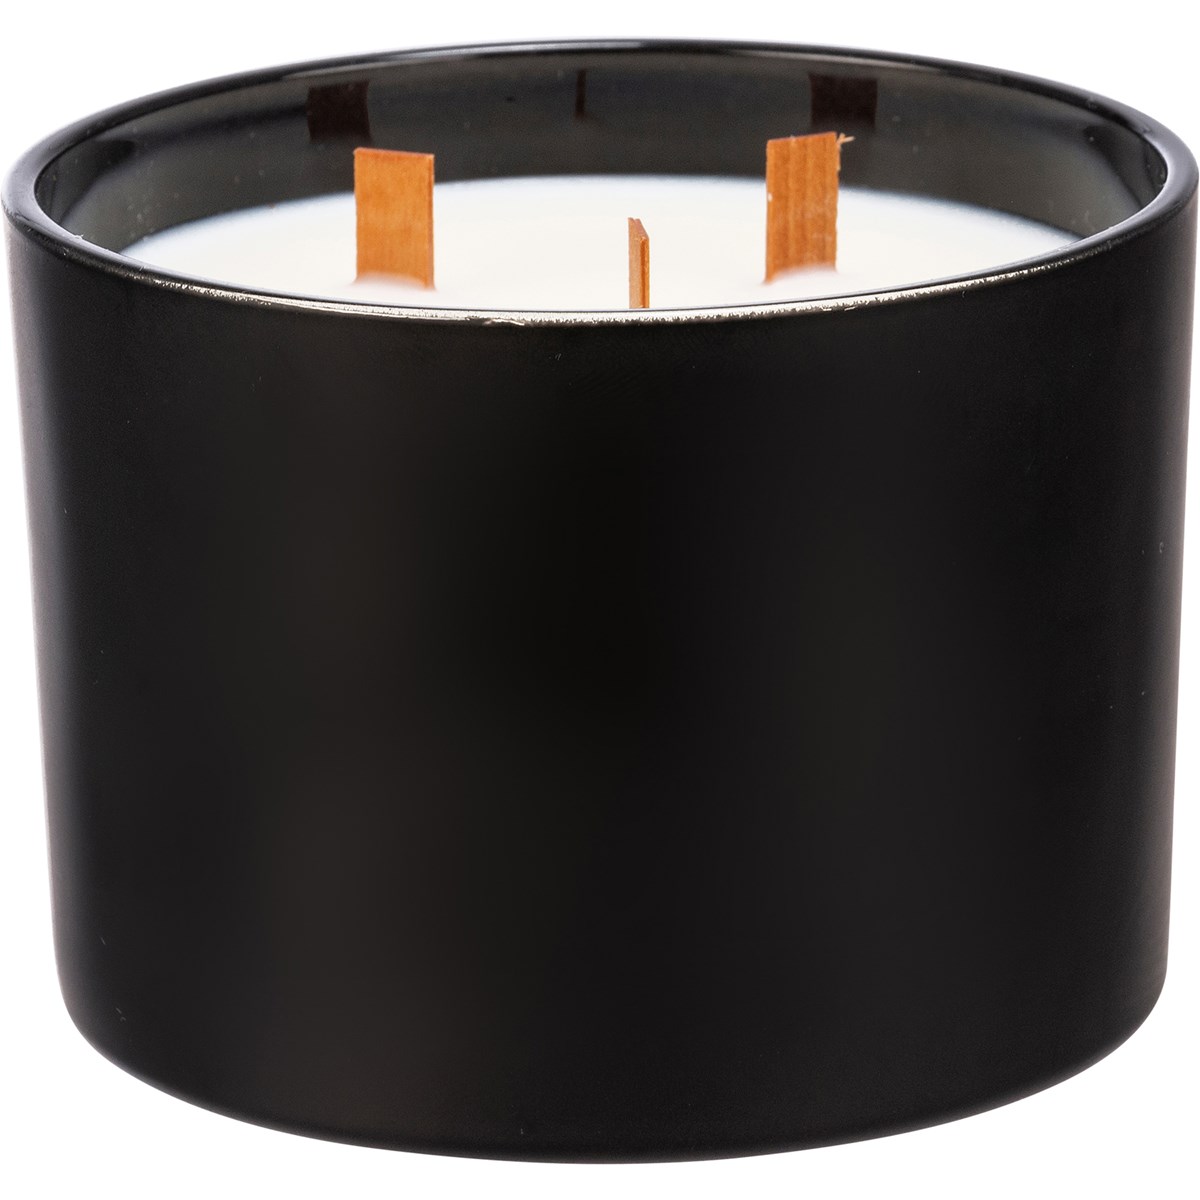 Family Candle - Soy Wax, Glass, Wood